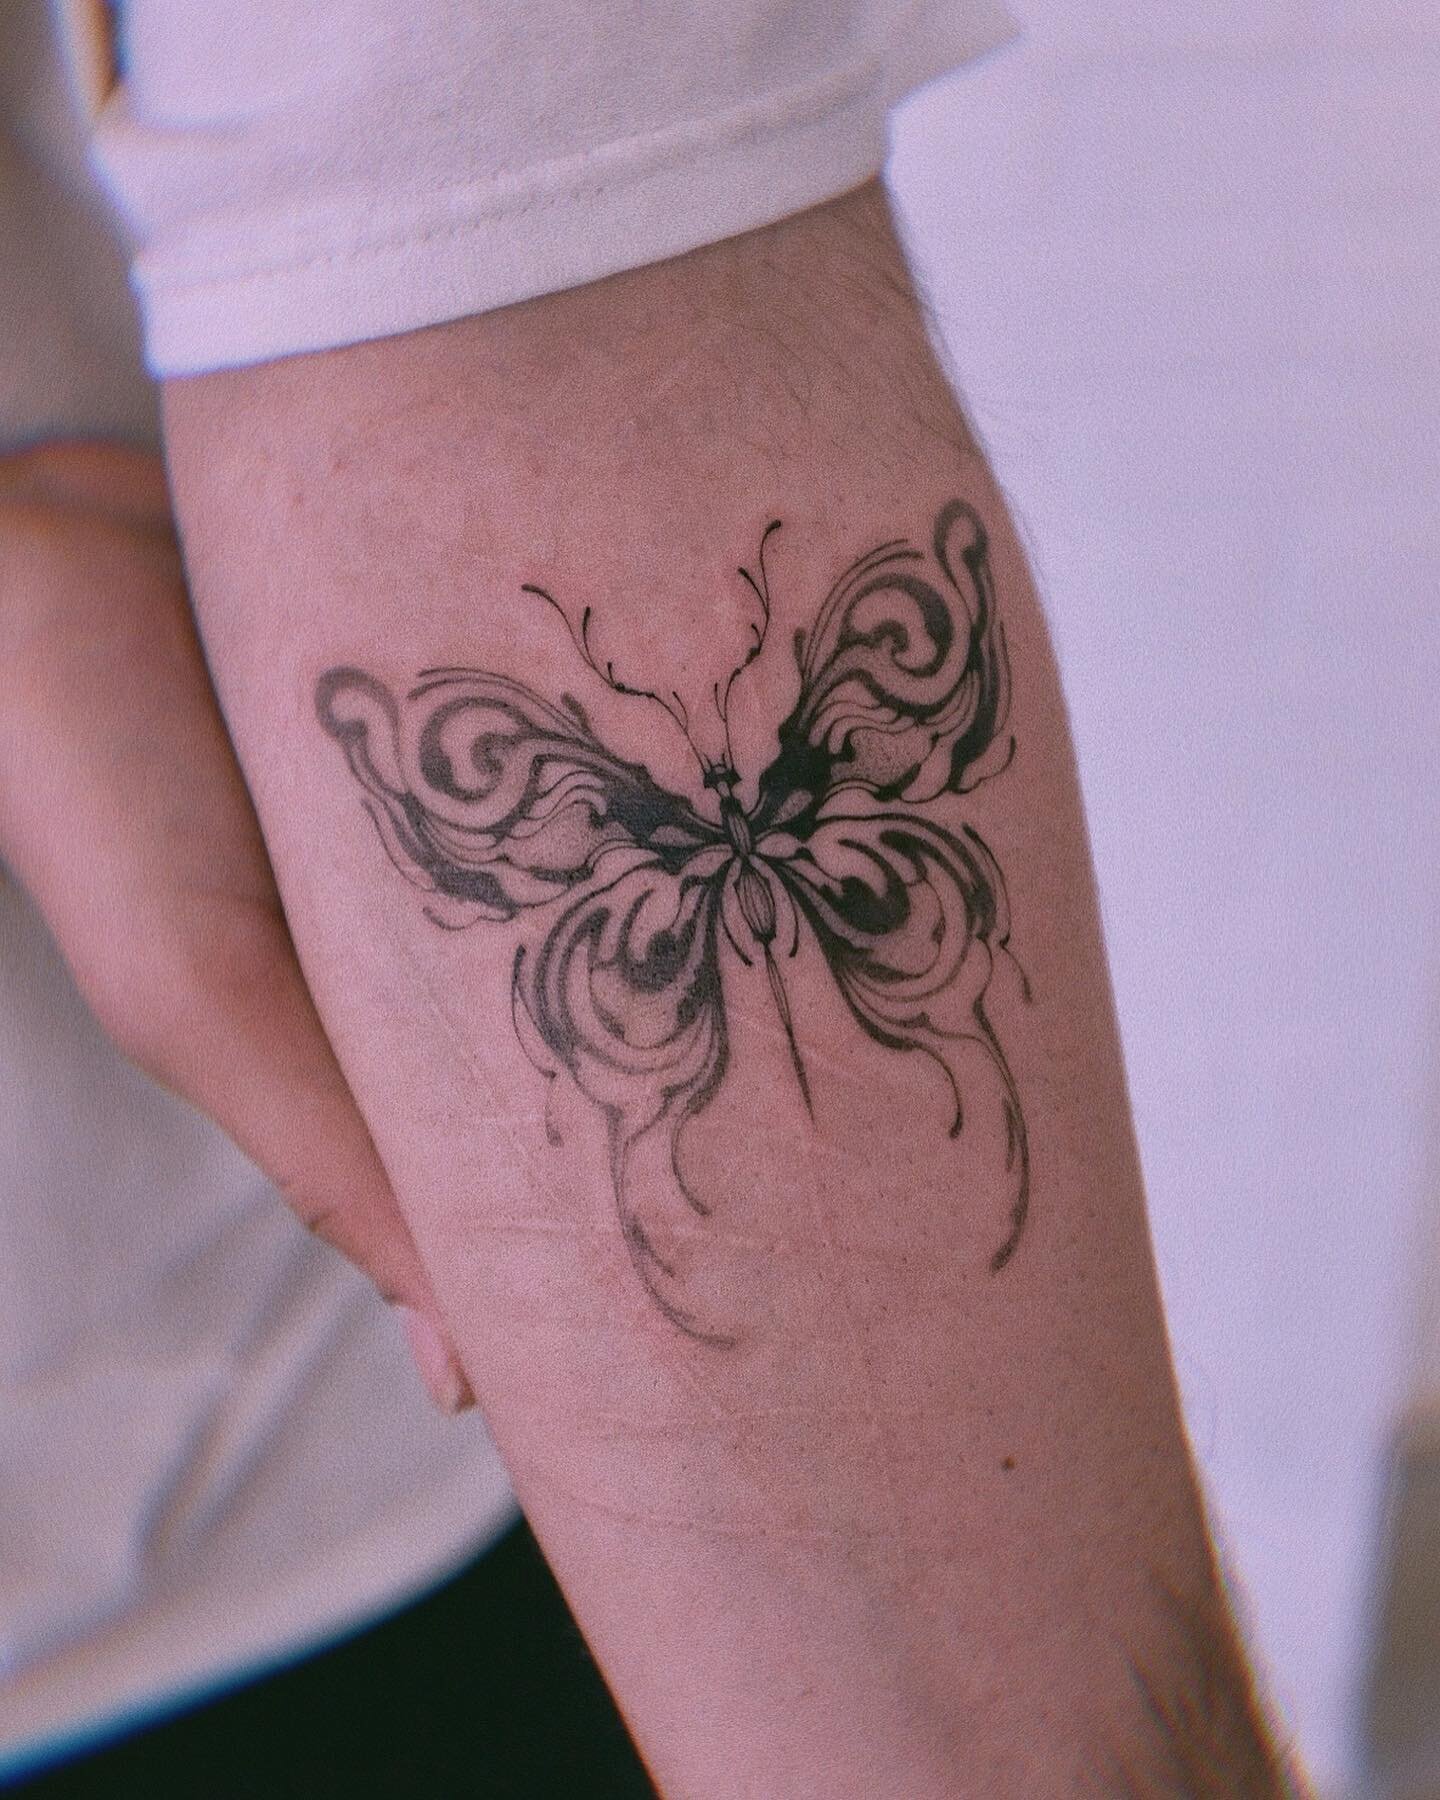 🦋 butterfly 🦋 
(more butterfly posts coming up !)
thank you so much Keon for trusting me with your first 🖤🥰

#illustration #illustagram&nbsp; #tattoos #ink #flash #sketch #lineart #tattoist #art #TAOT #abstractart #tttism #blacktattoo&nbsp; #tatt